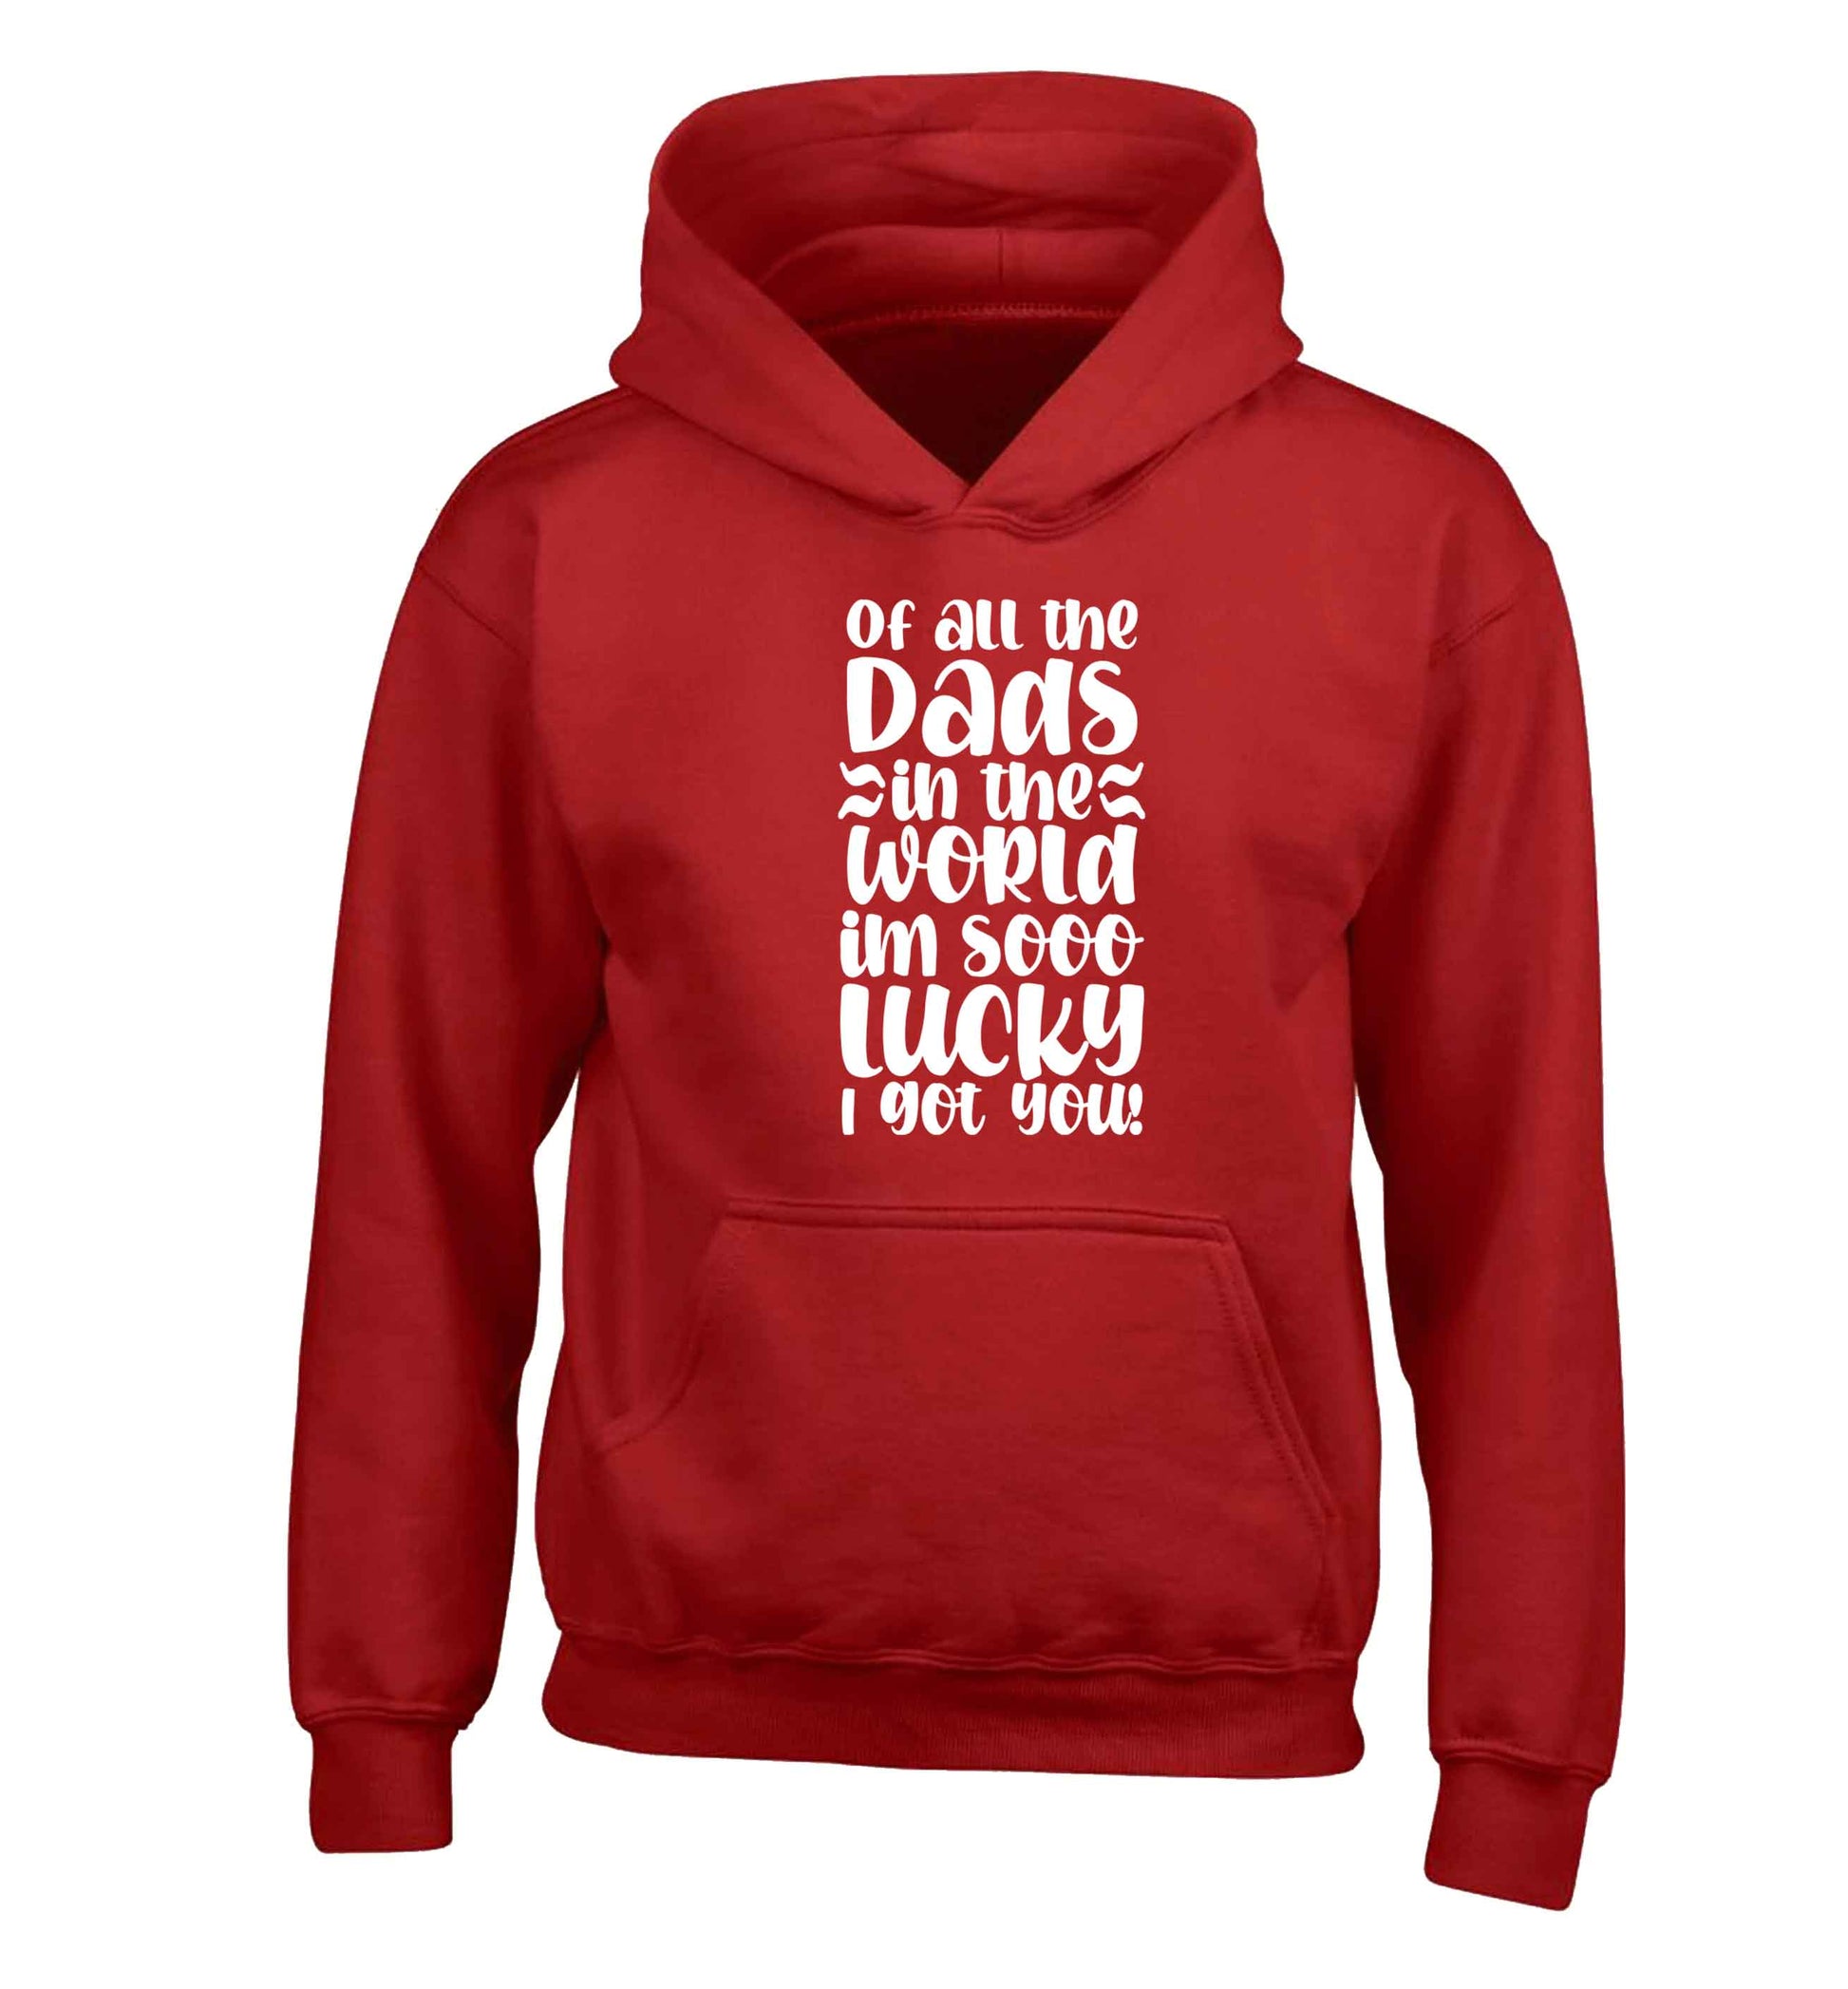 Of all the Dads in the world I'm so lucky I got you children's red hoodie 12-13 Years